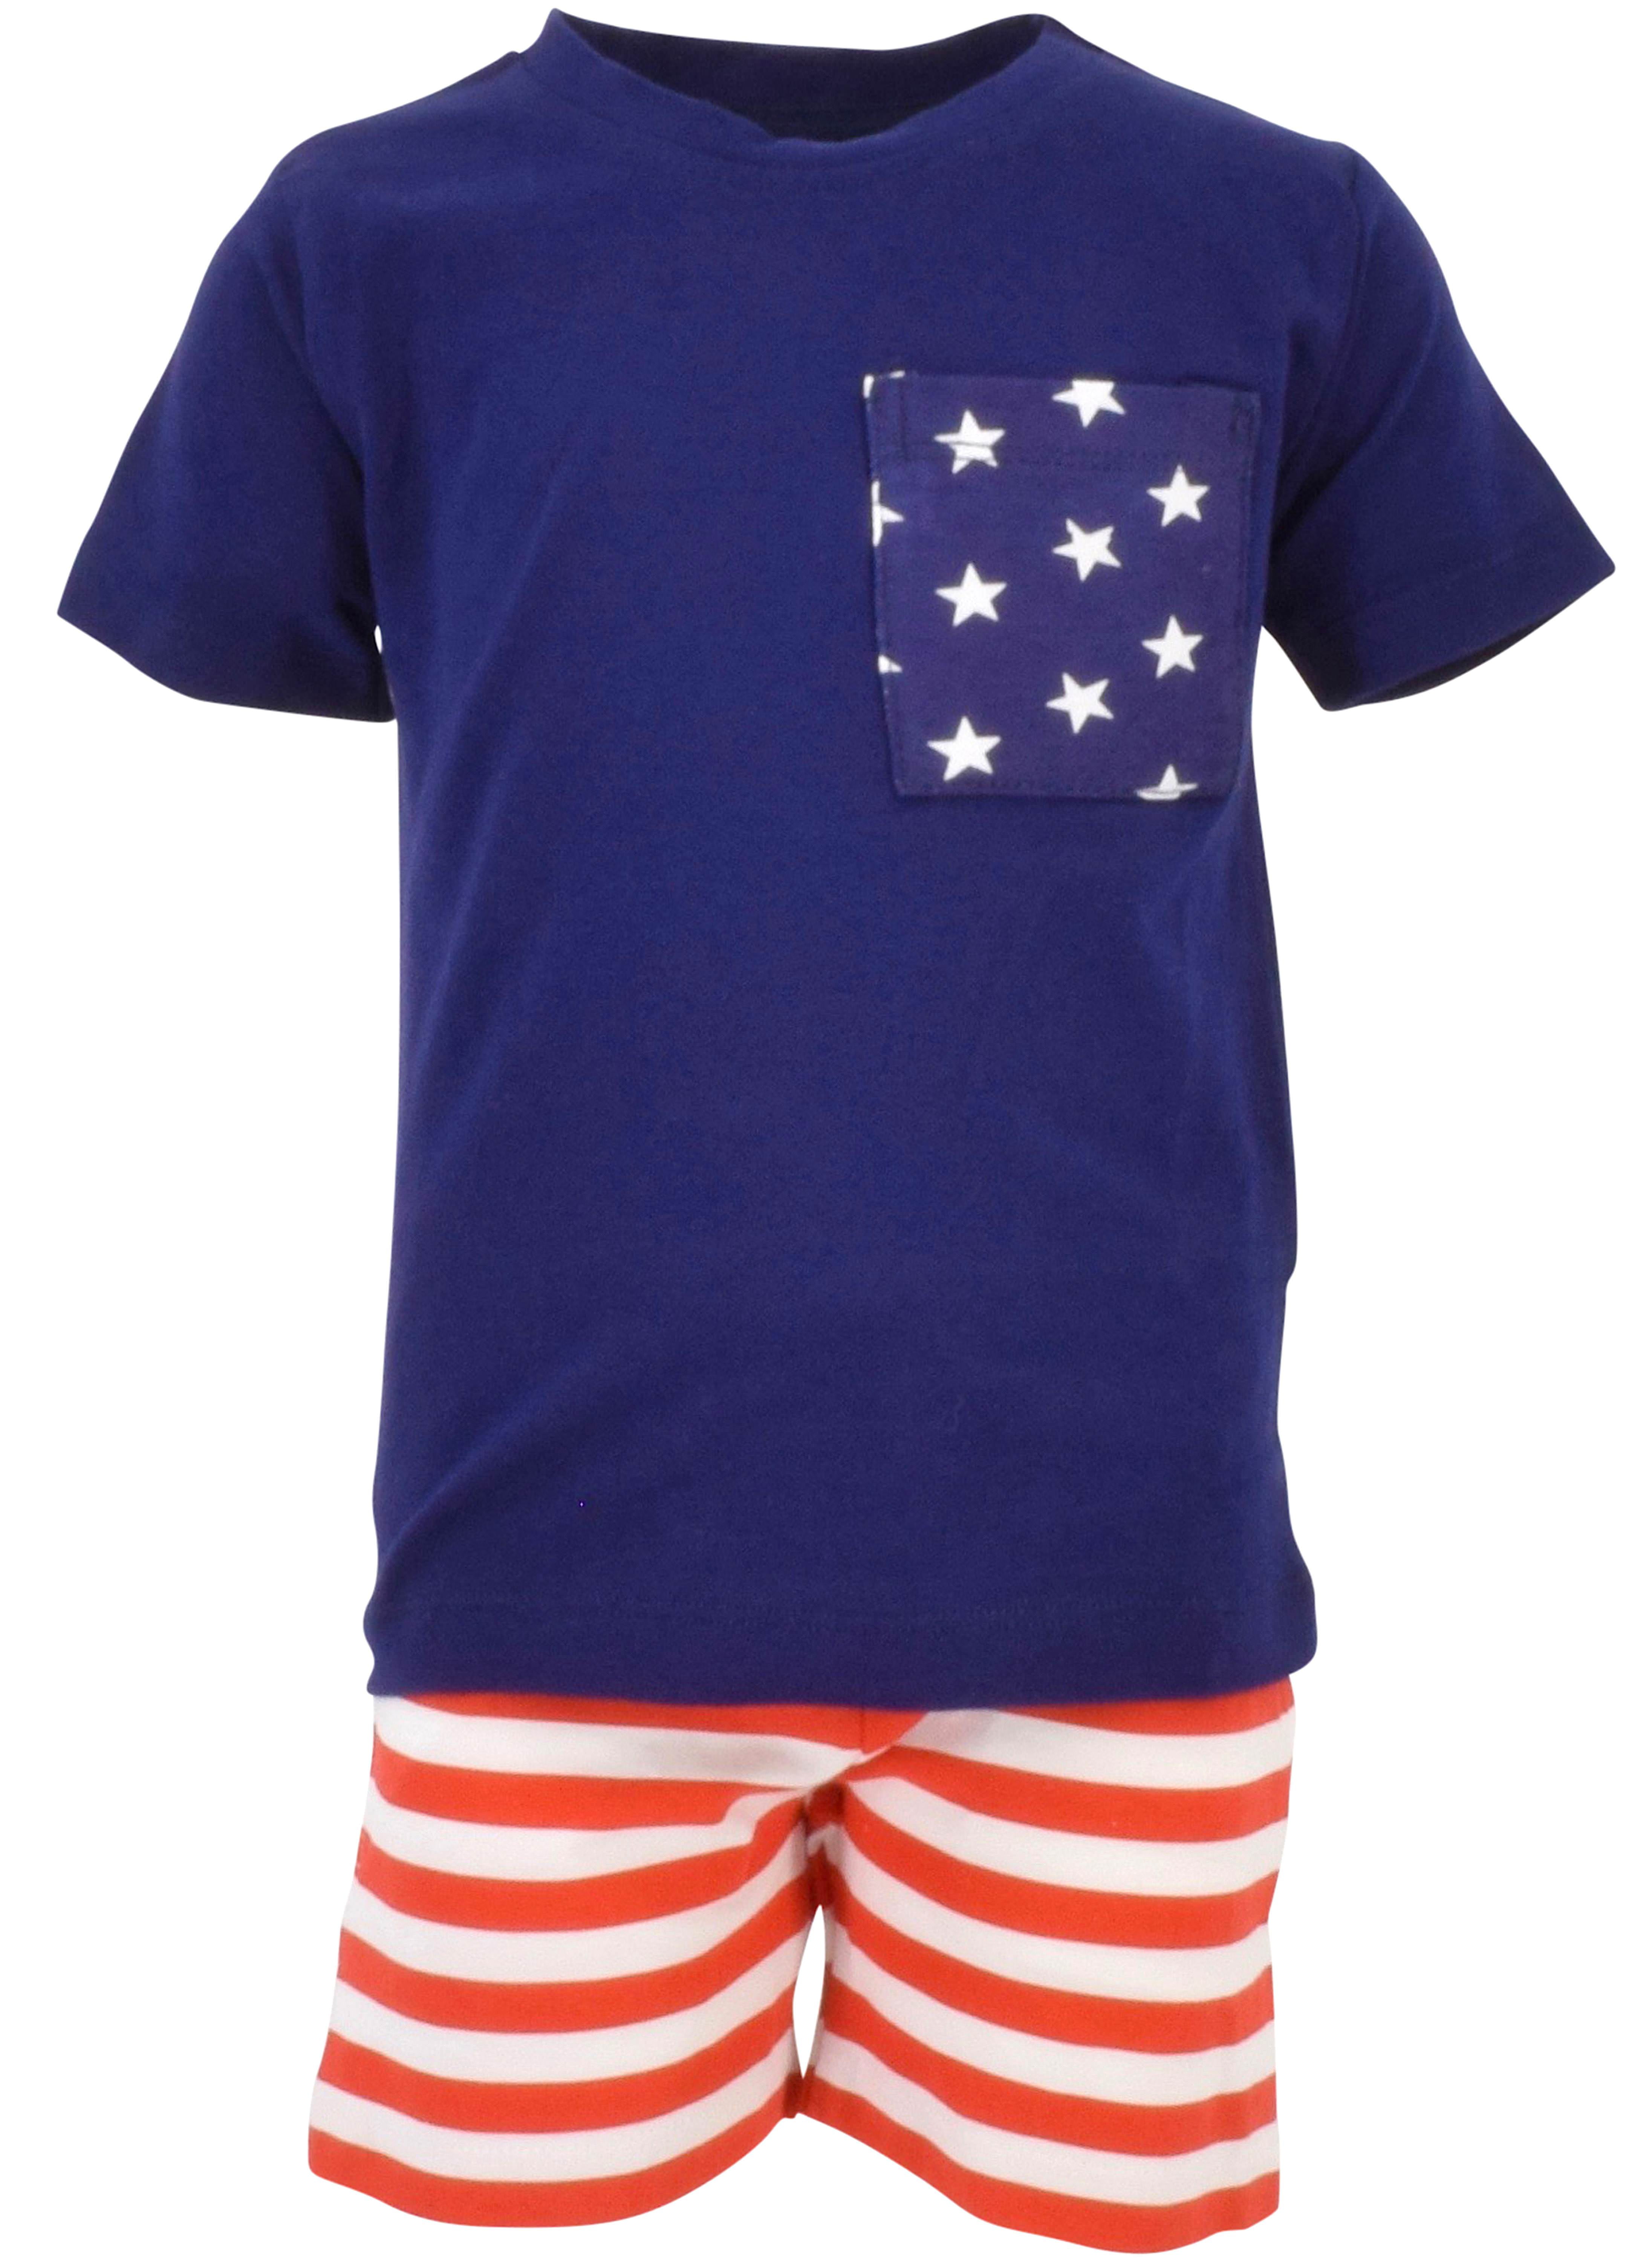 NWT Patriotic Red White Blue 2 PC Baby Boy's Outfit Shirt and Shorts 6-9 12 18M 